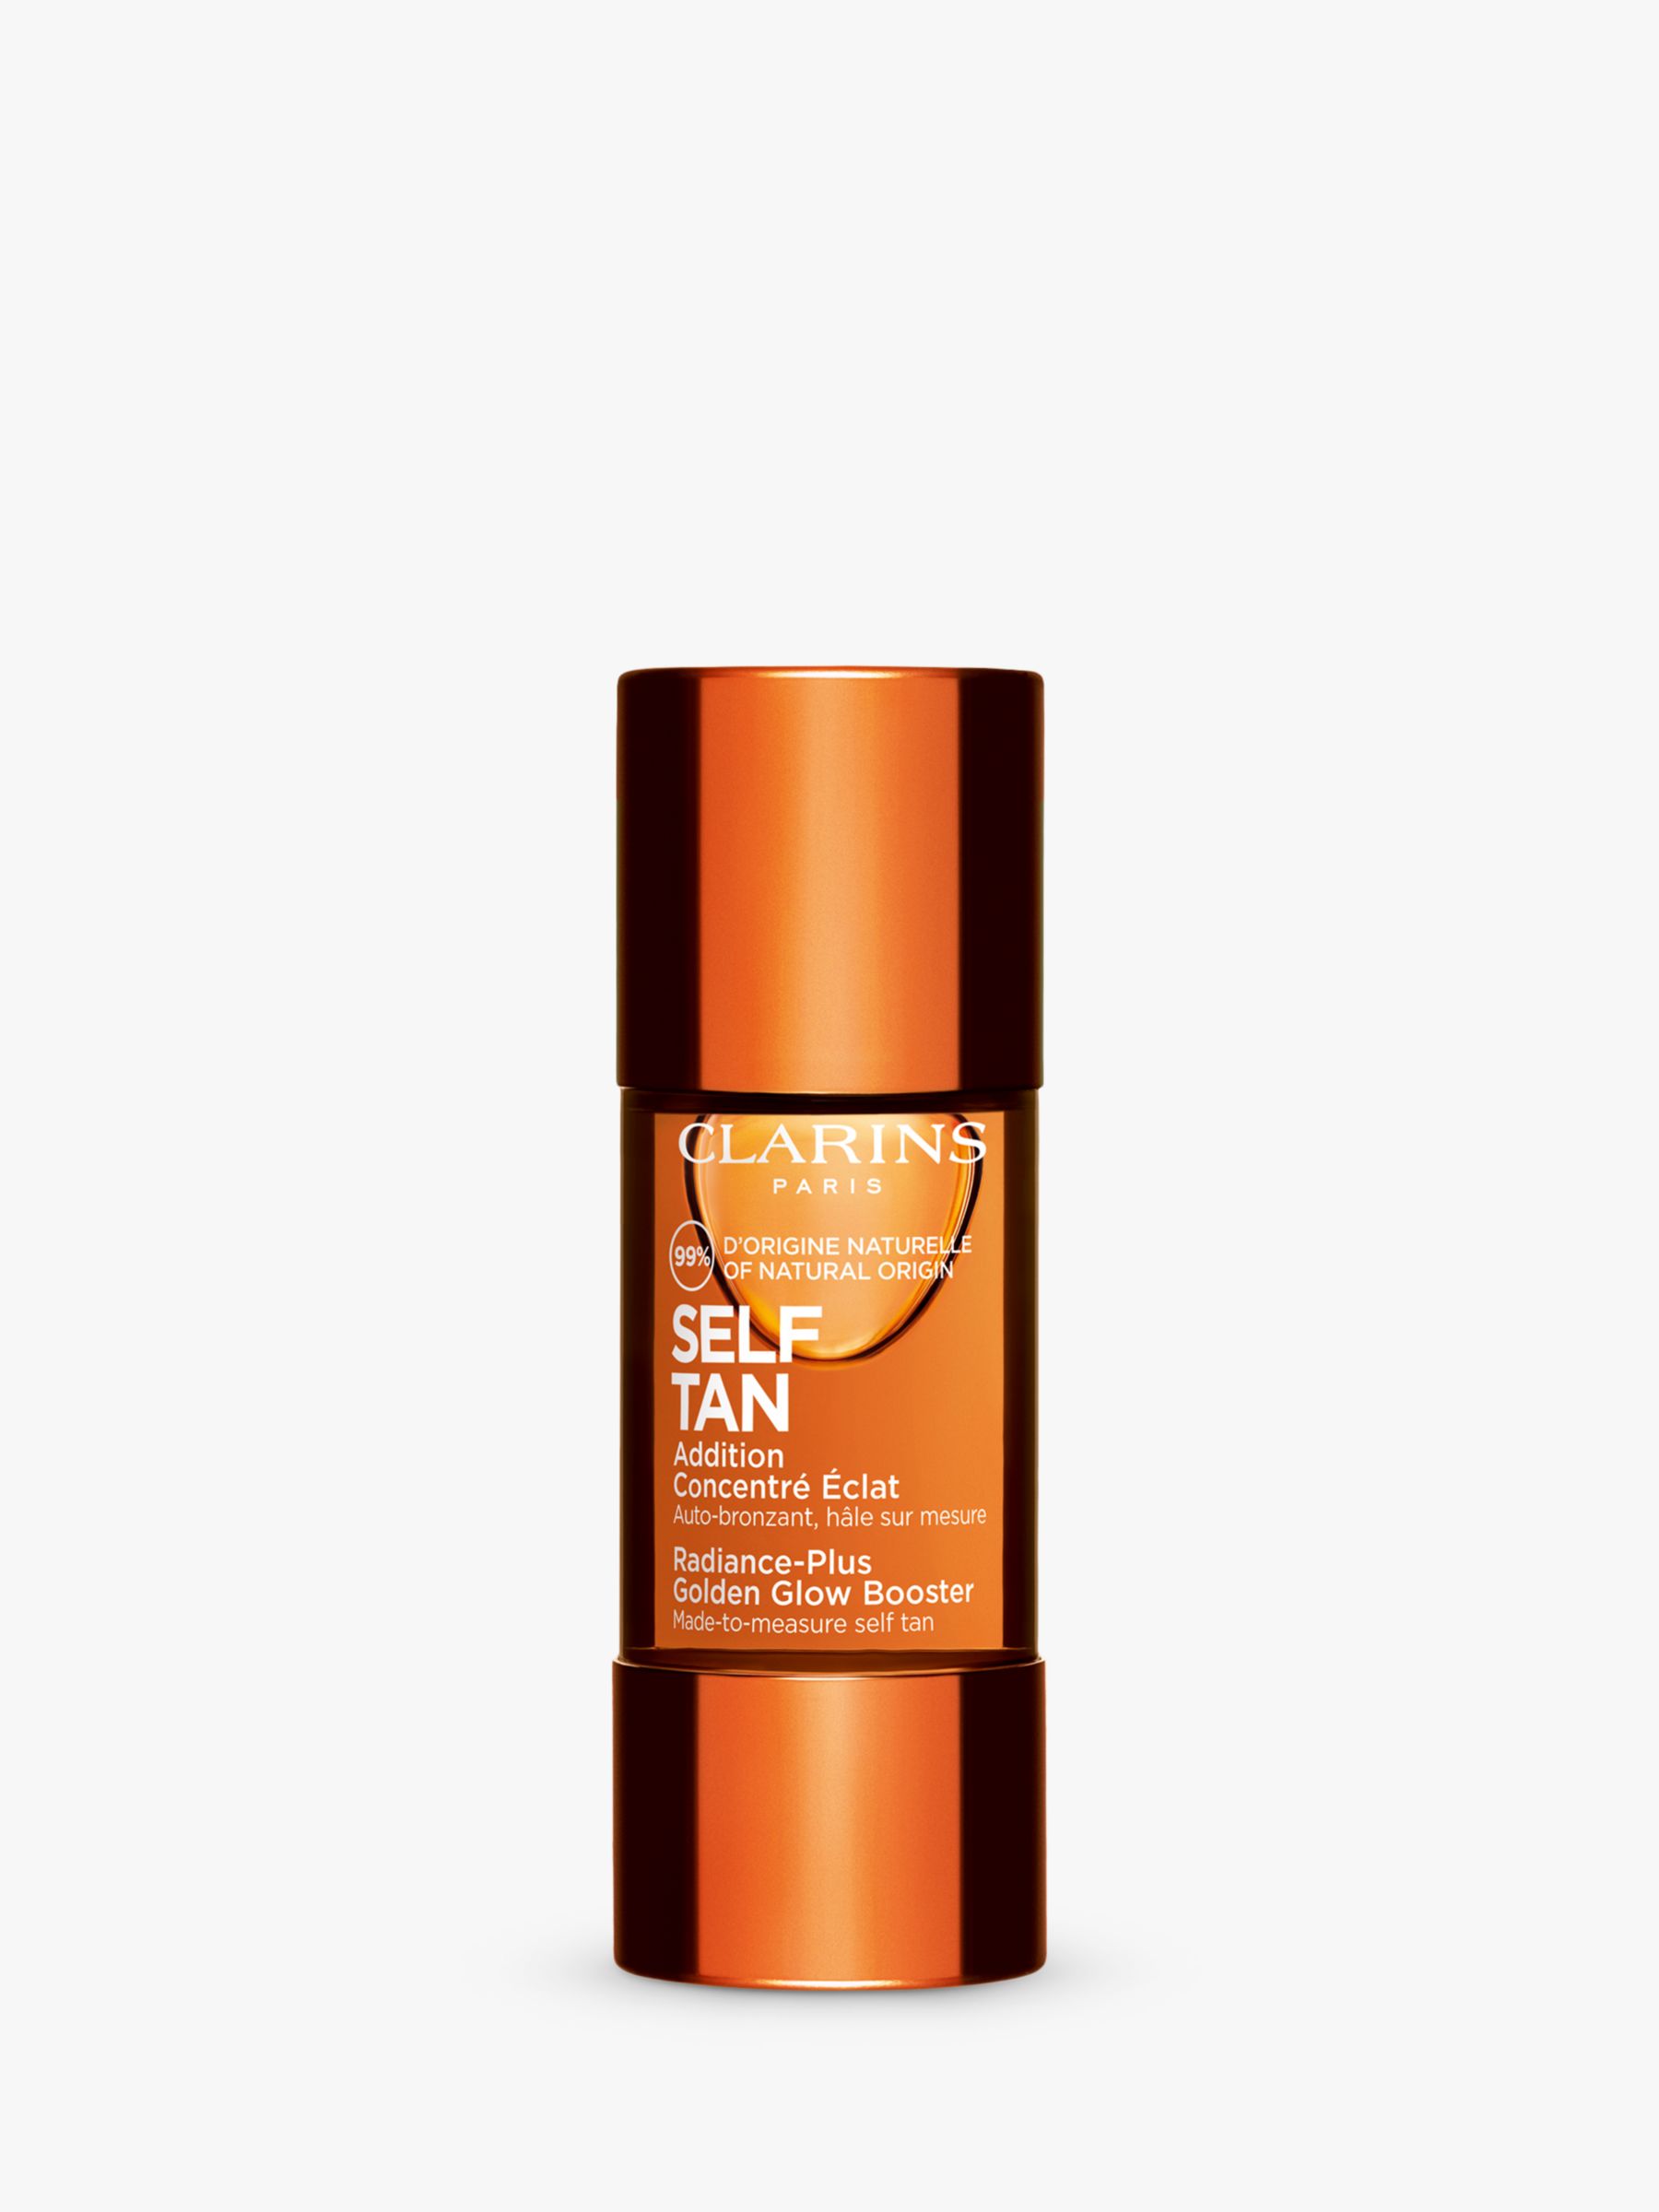 Clarins Radiance-Plus Golden Glow Booster for Face, 15ml 1